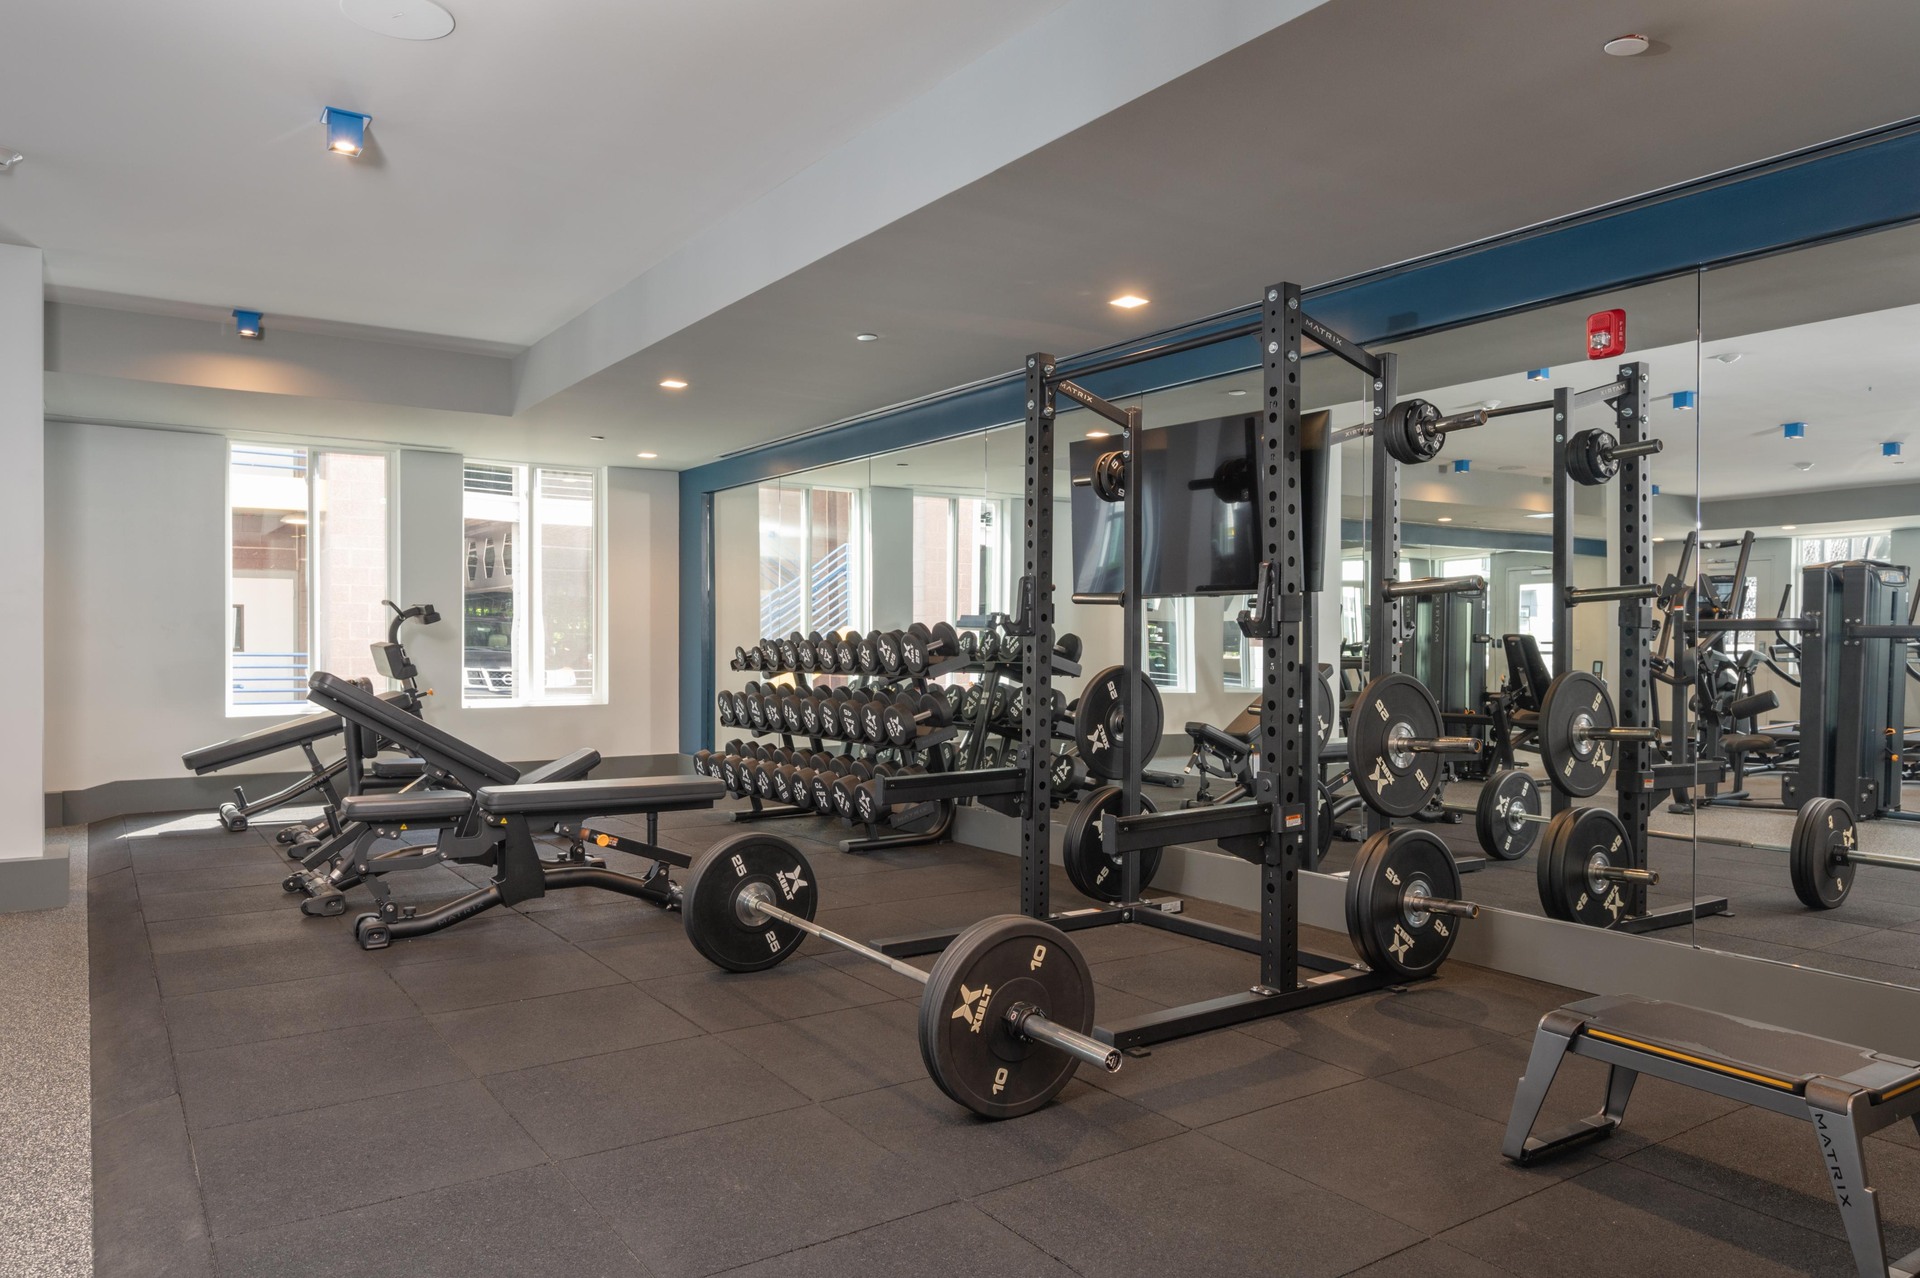 Fitness room with weight equipment.